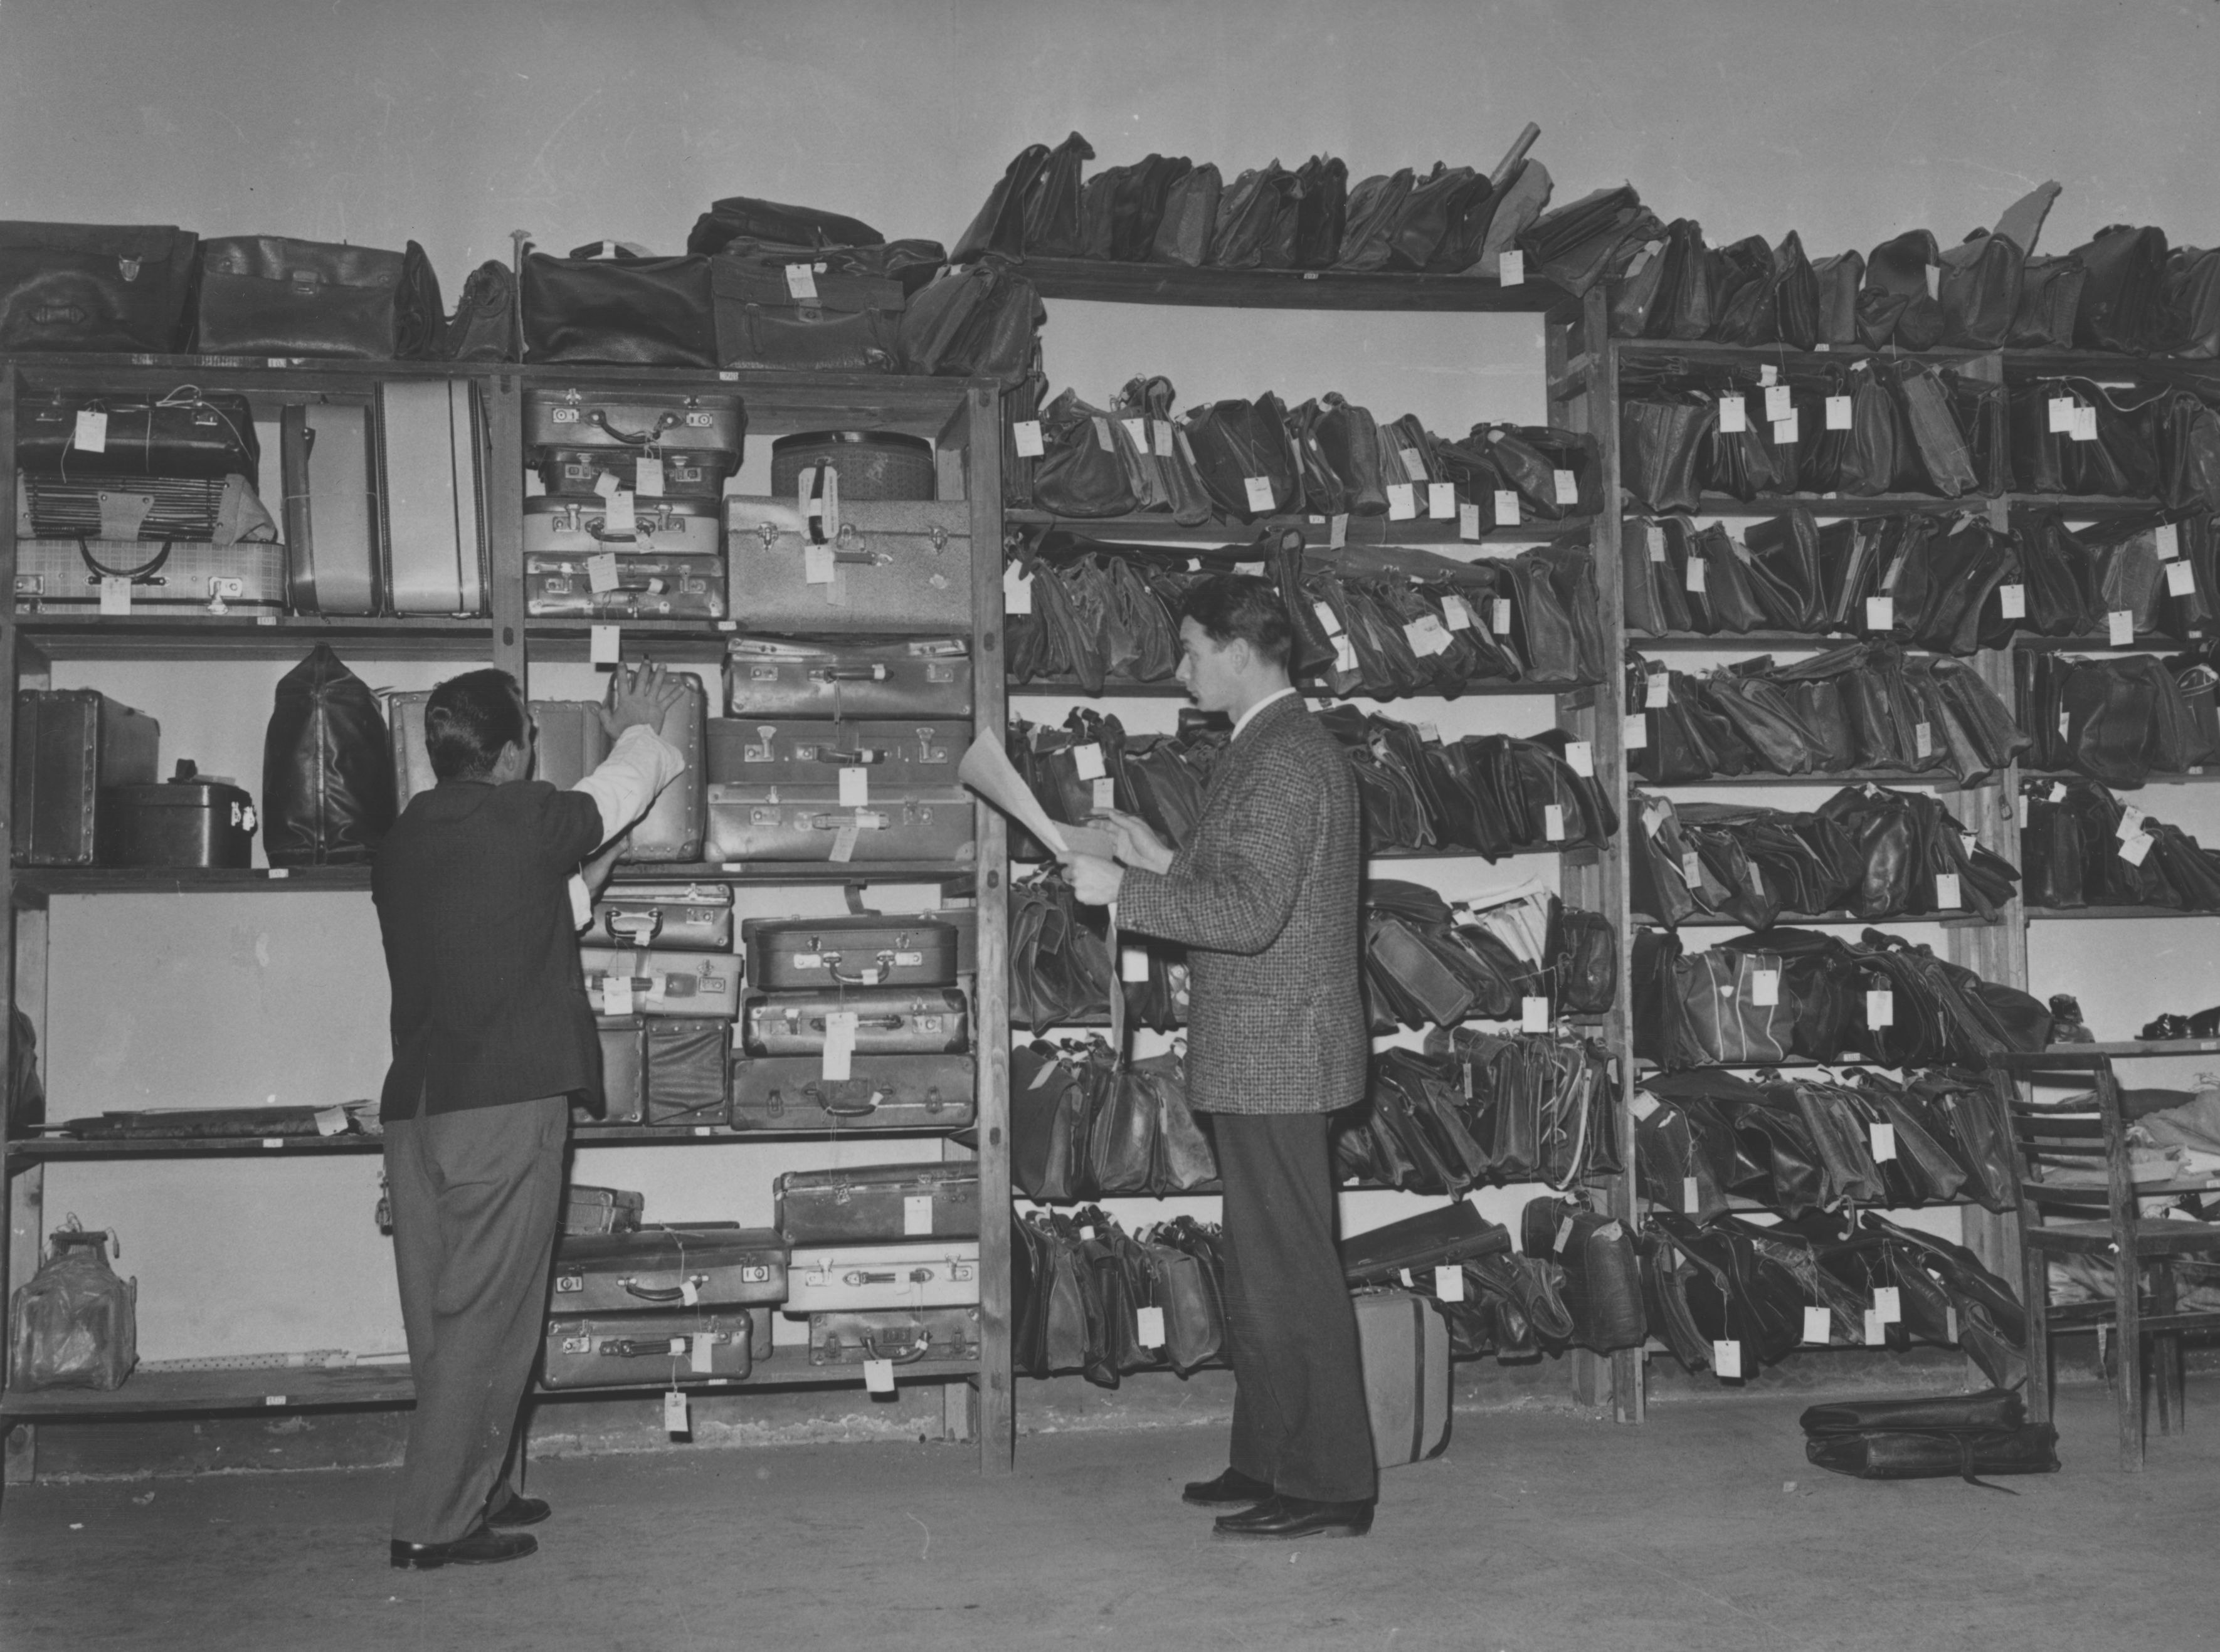 A pair of airport employees check paperwork and labels related to unclaimed baggage at a Lost Property Office in Rome in 1964.